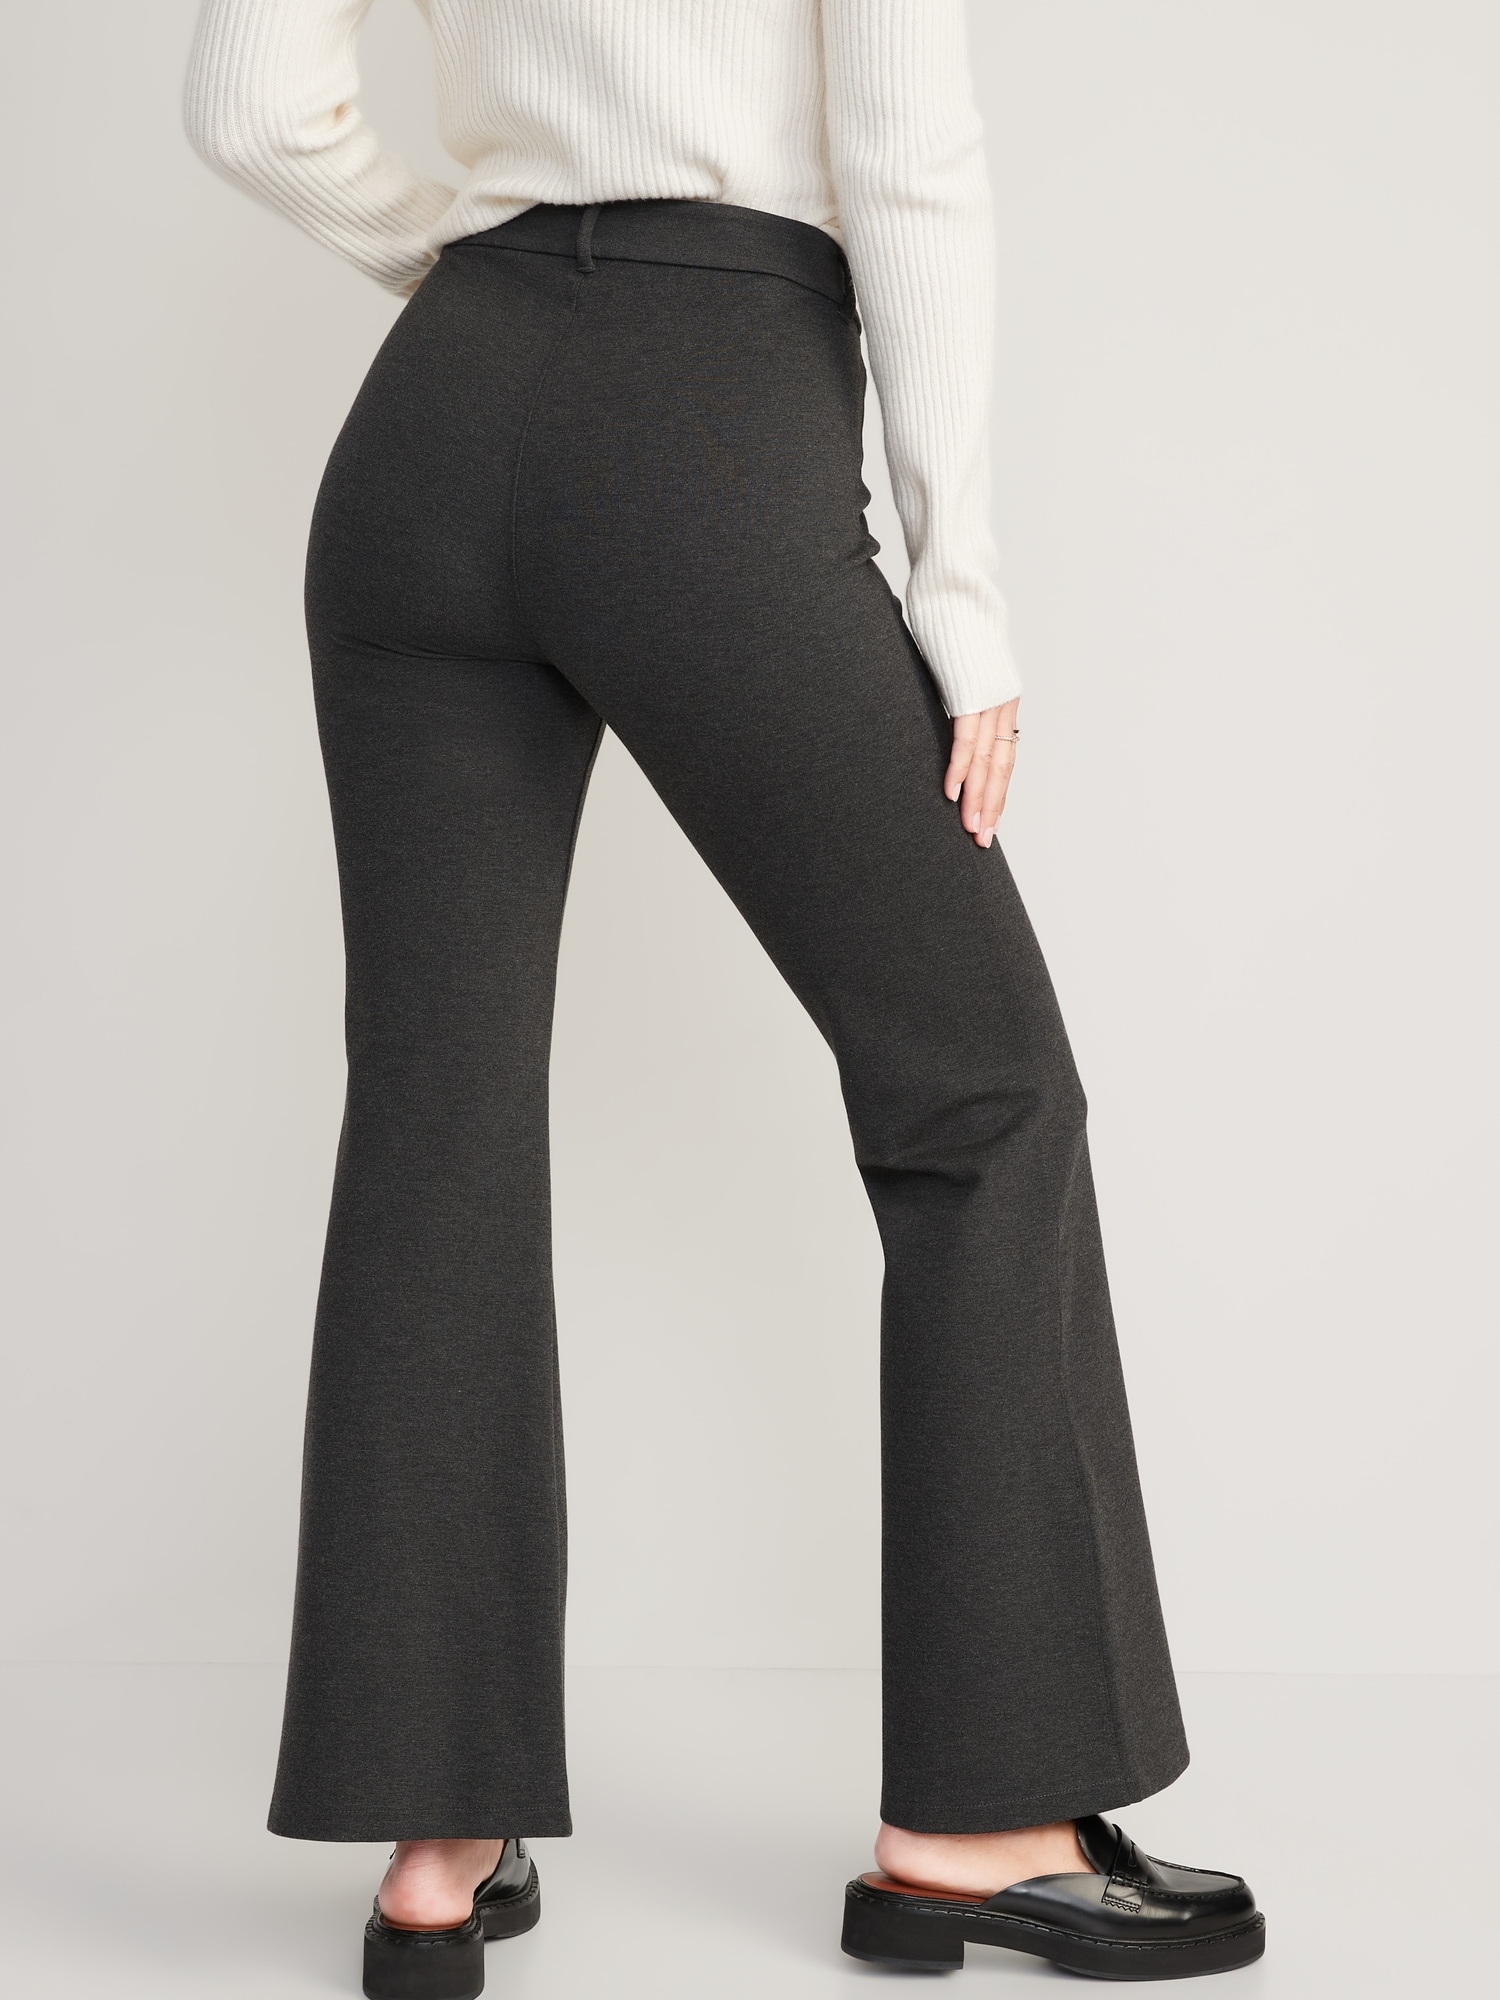 Extra High-Waisted Stevie Trouser Flare Pants for Women | Old Navy